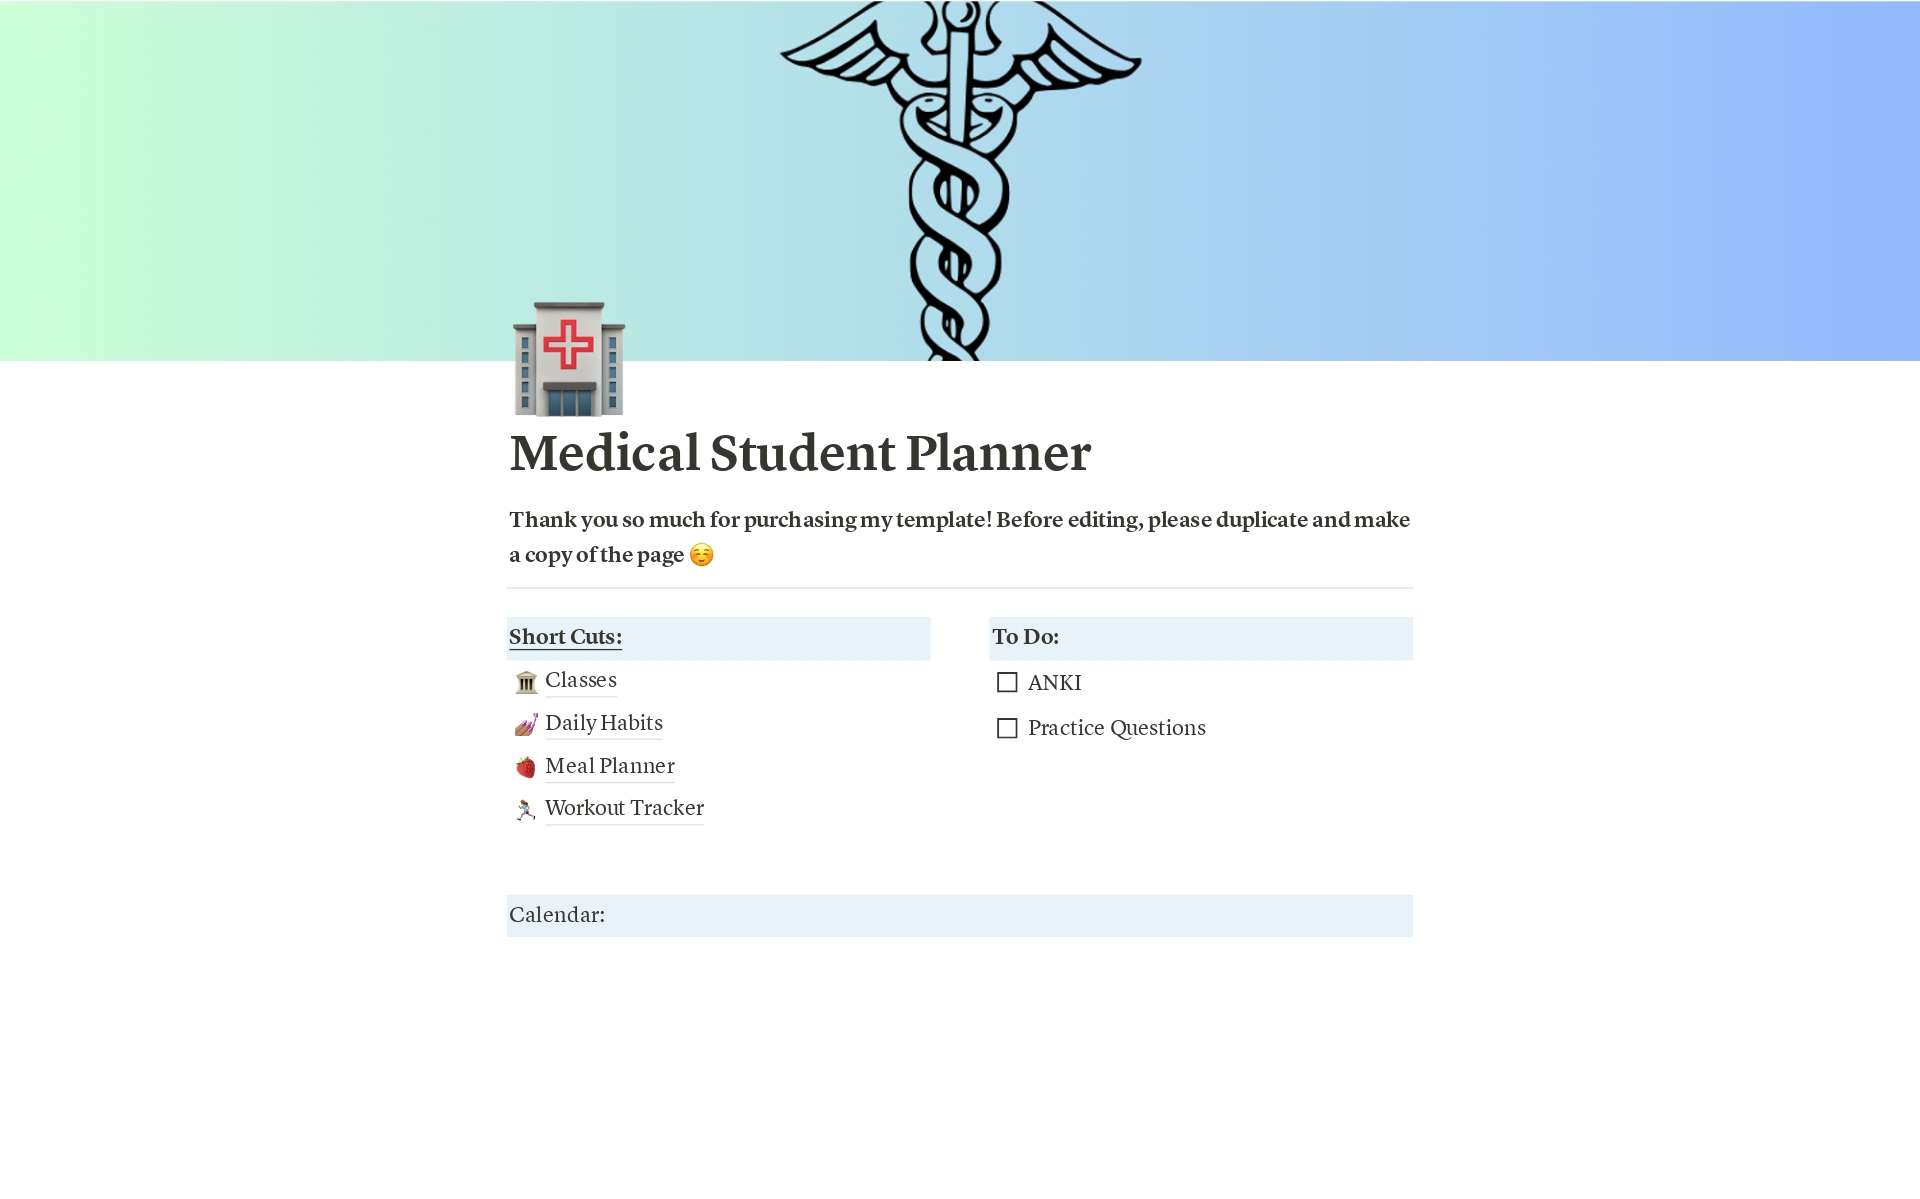 An all in one planner designed for medical (and pre-health) students to put all their information in one place. From note taking, meal prepping, and workout tracking, this planner aims to help students simplify their life amidst their busy schedules. 